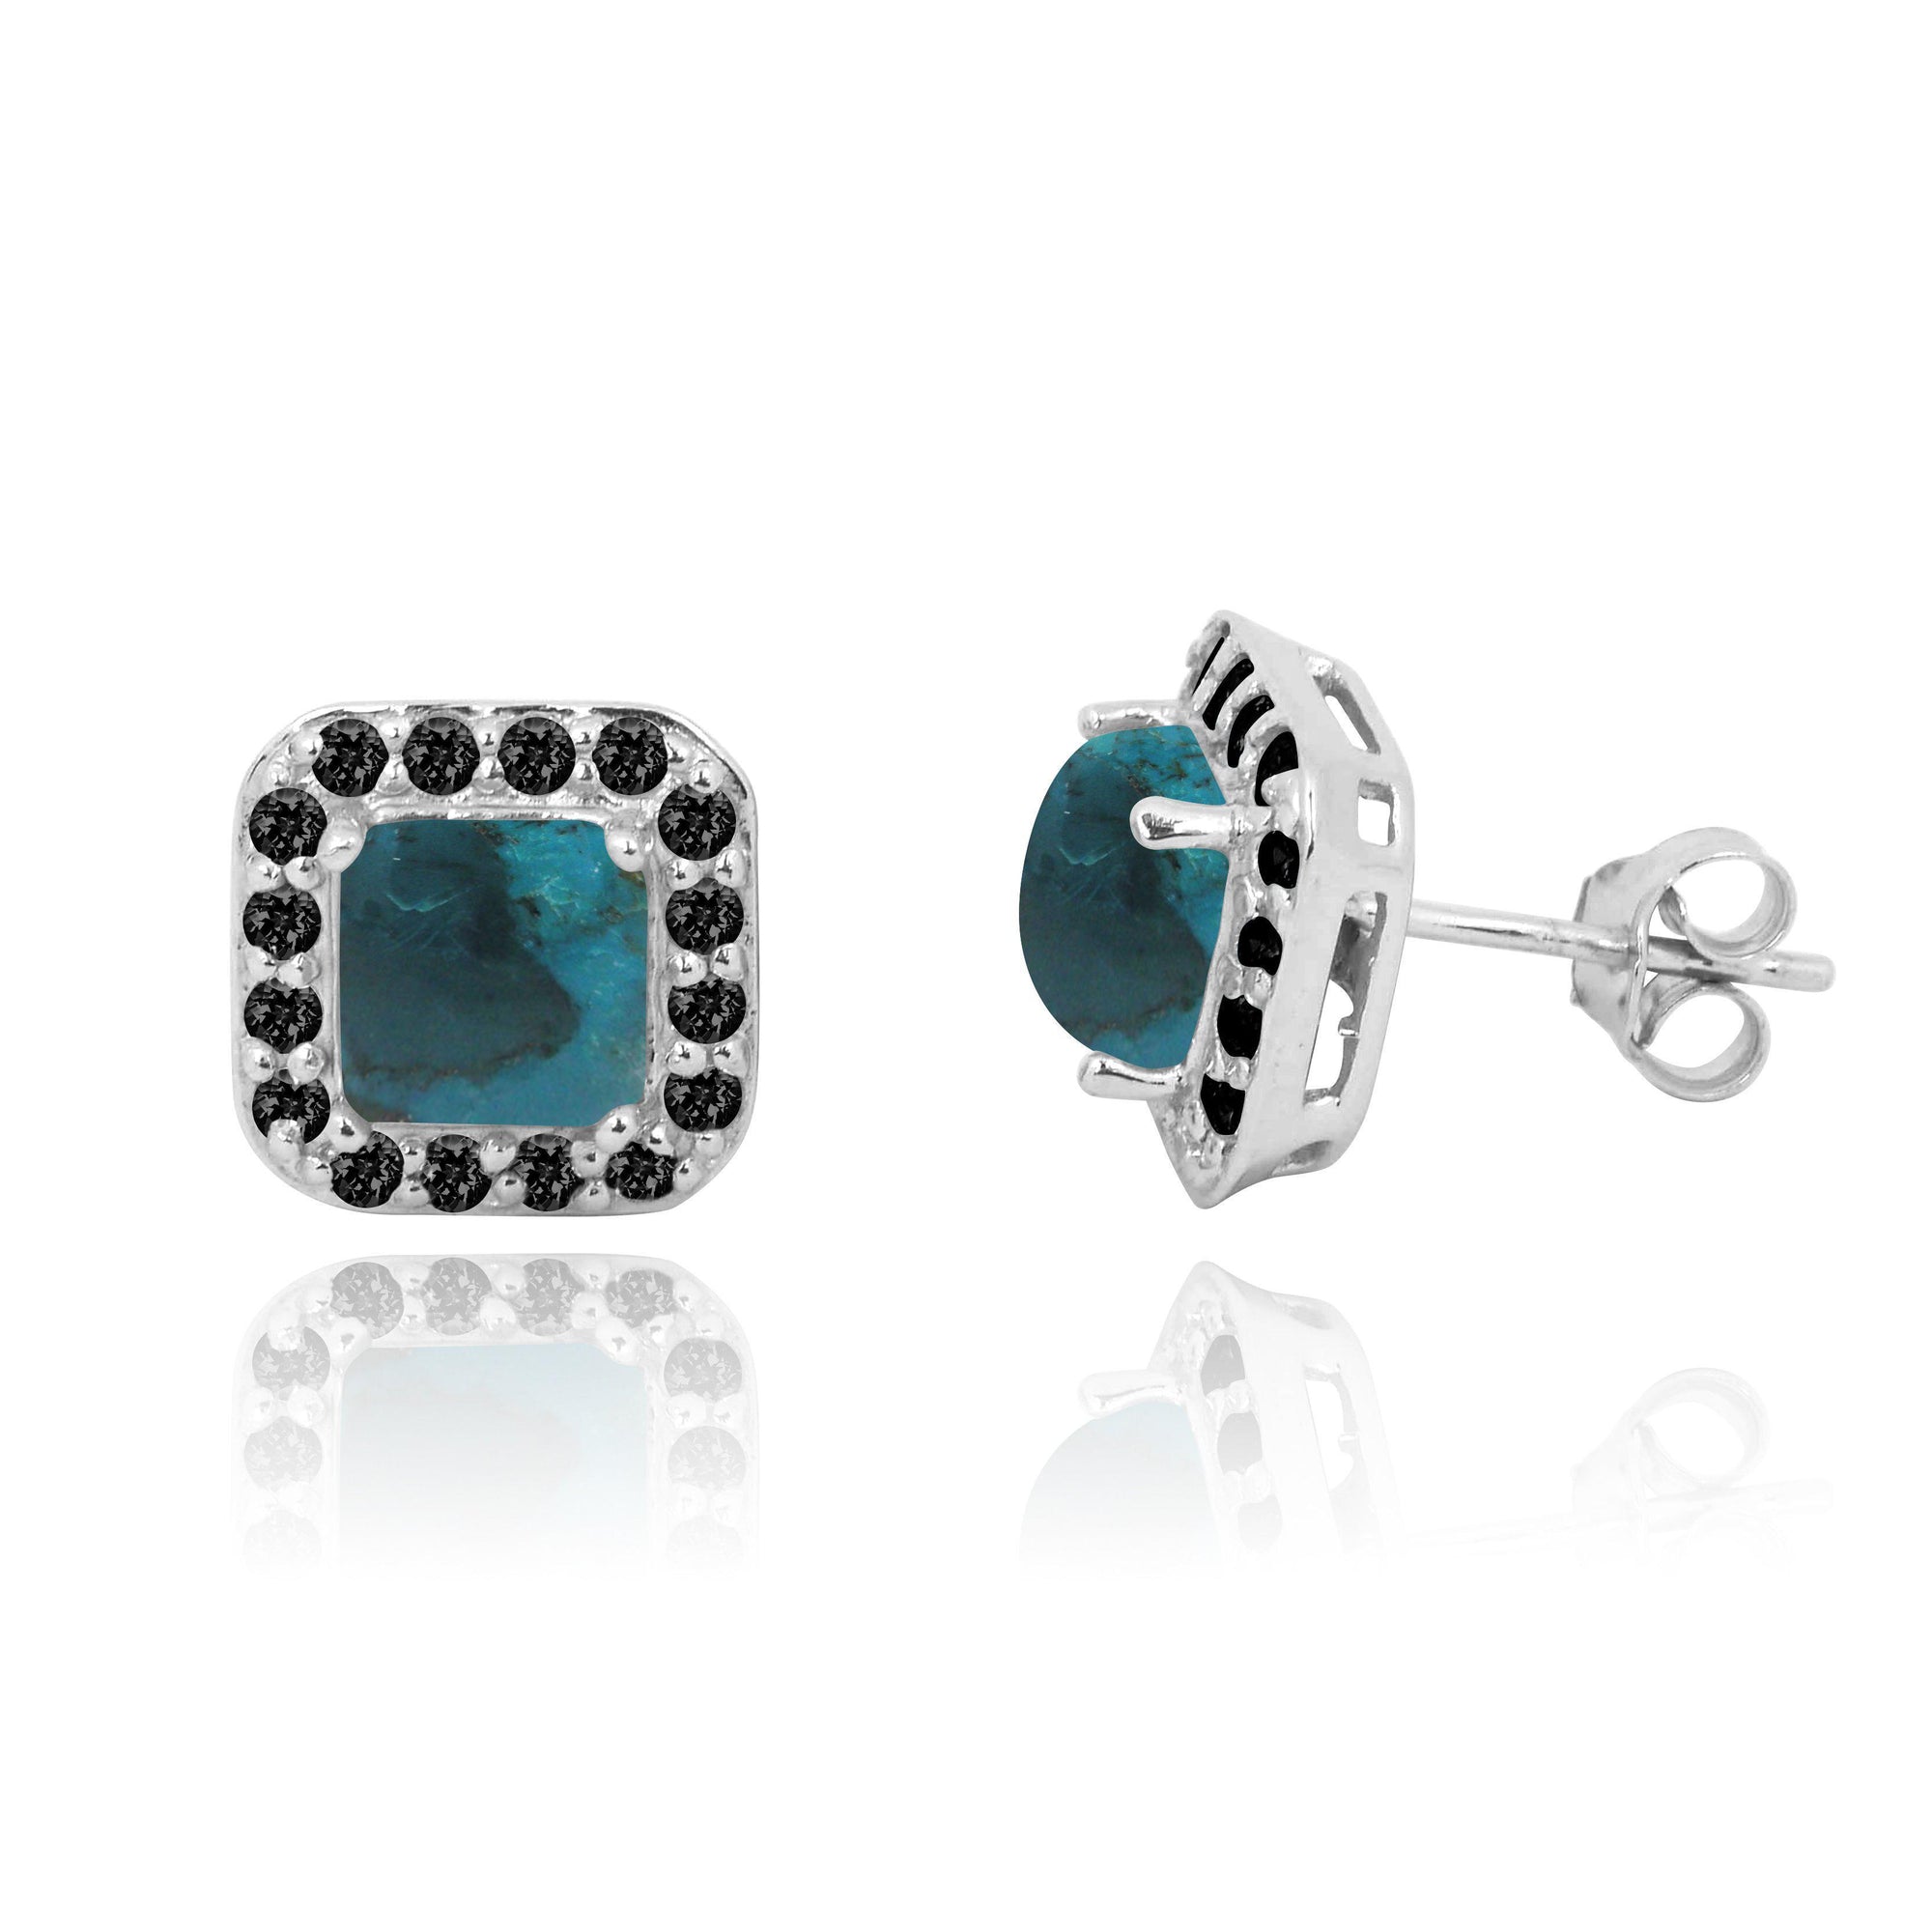 Compressed Turquoise Stud Earrings with 32 Round Shape Black Spinal Stones